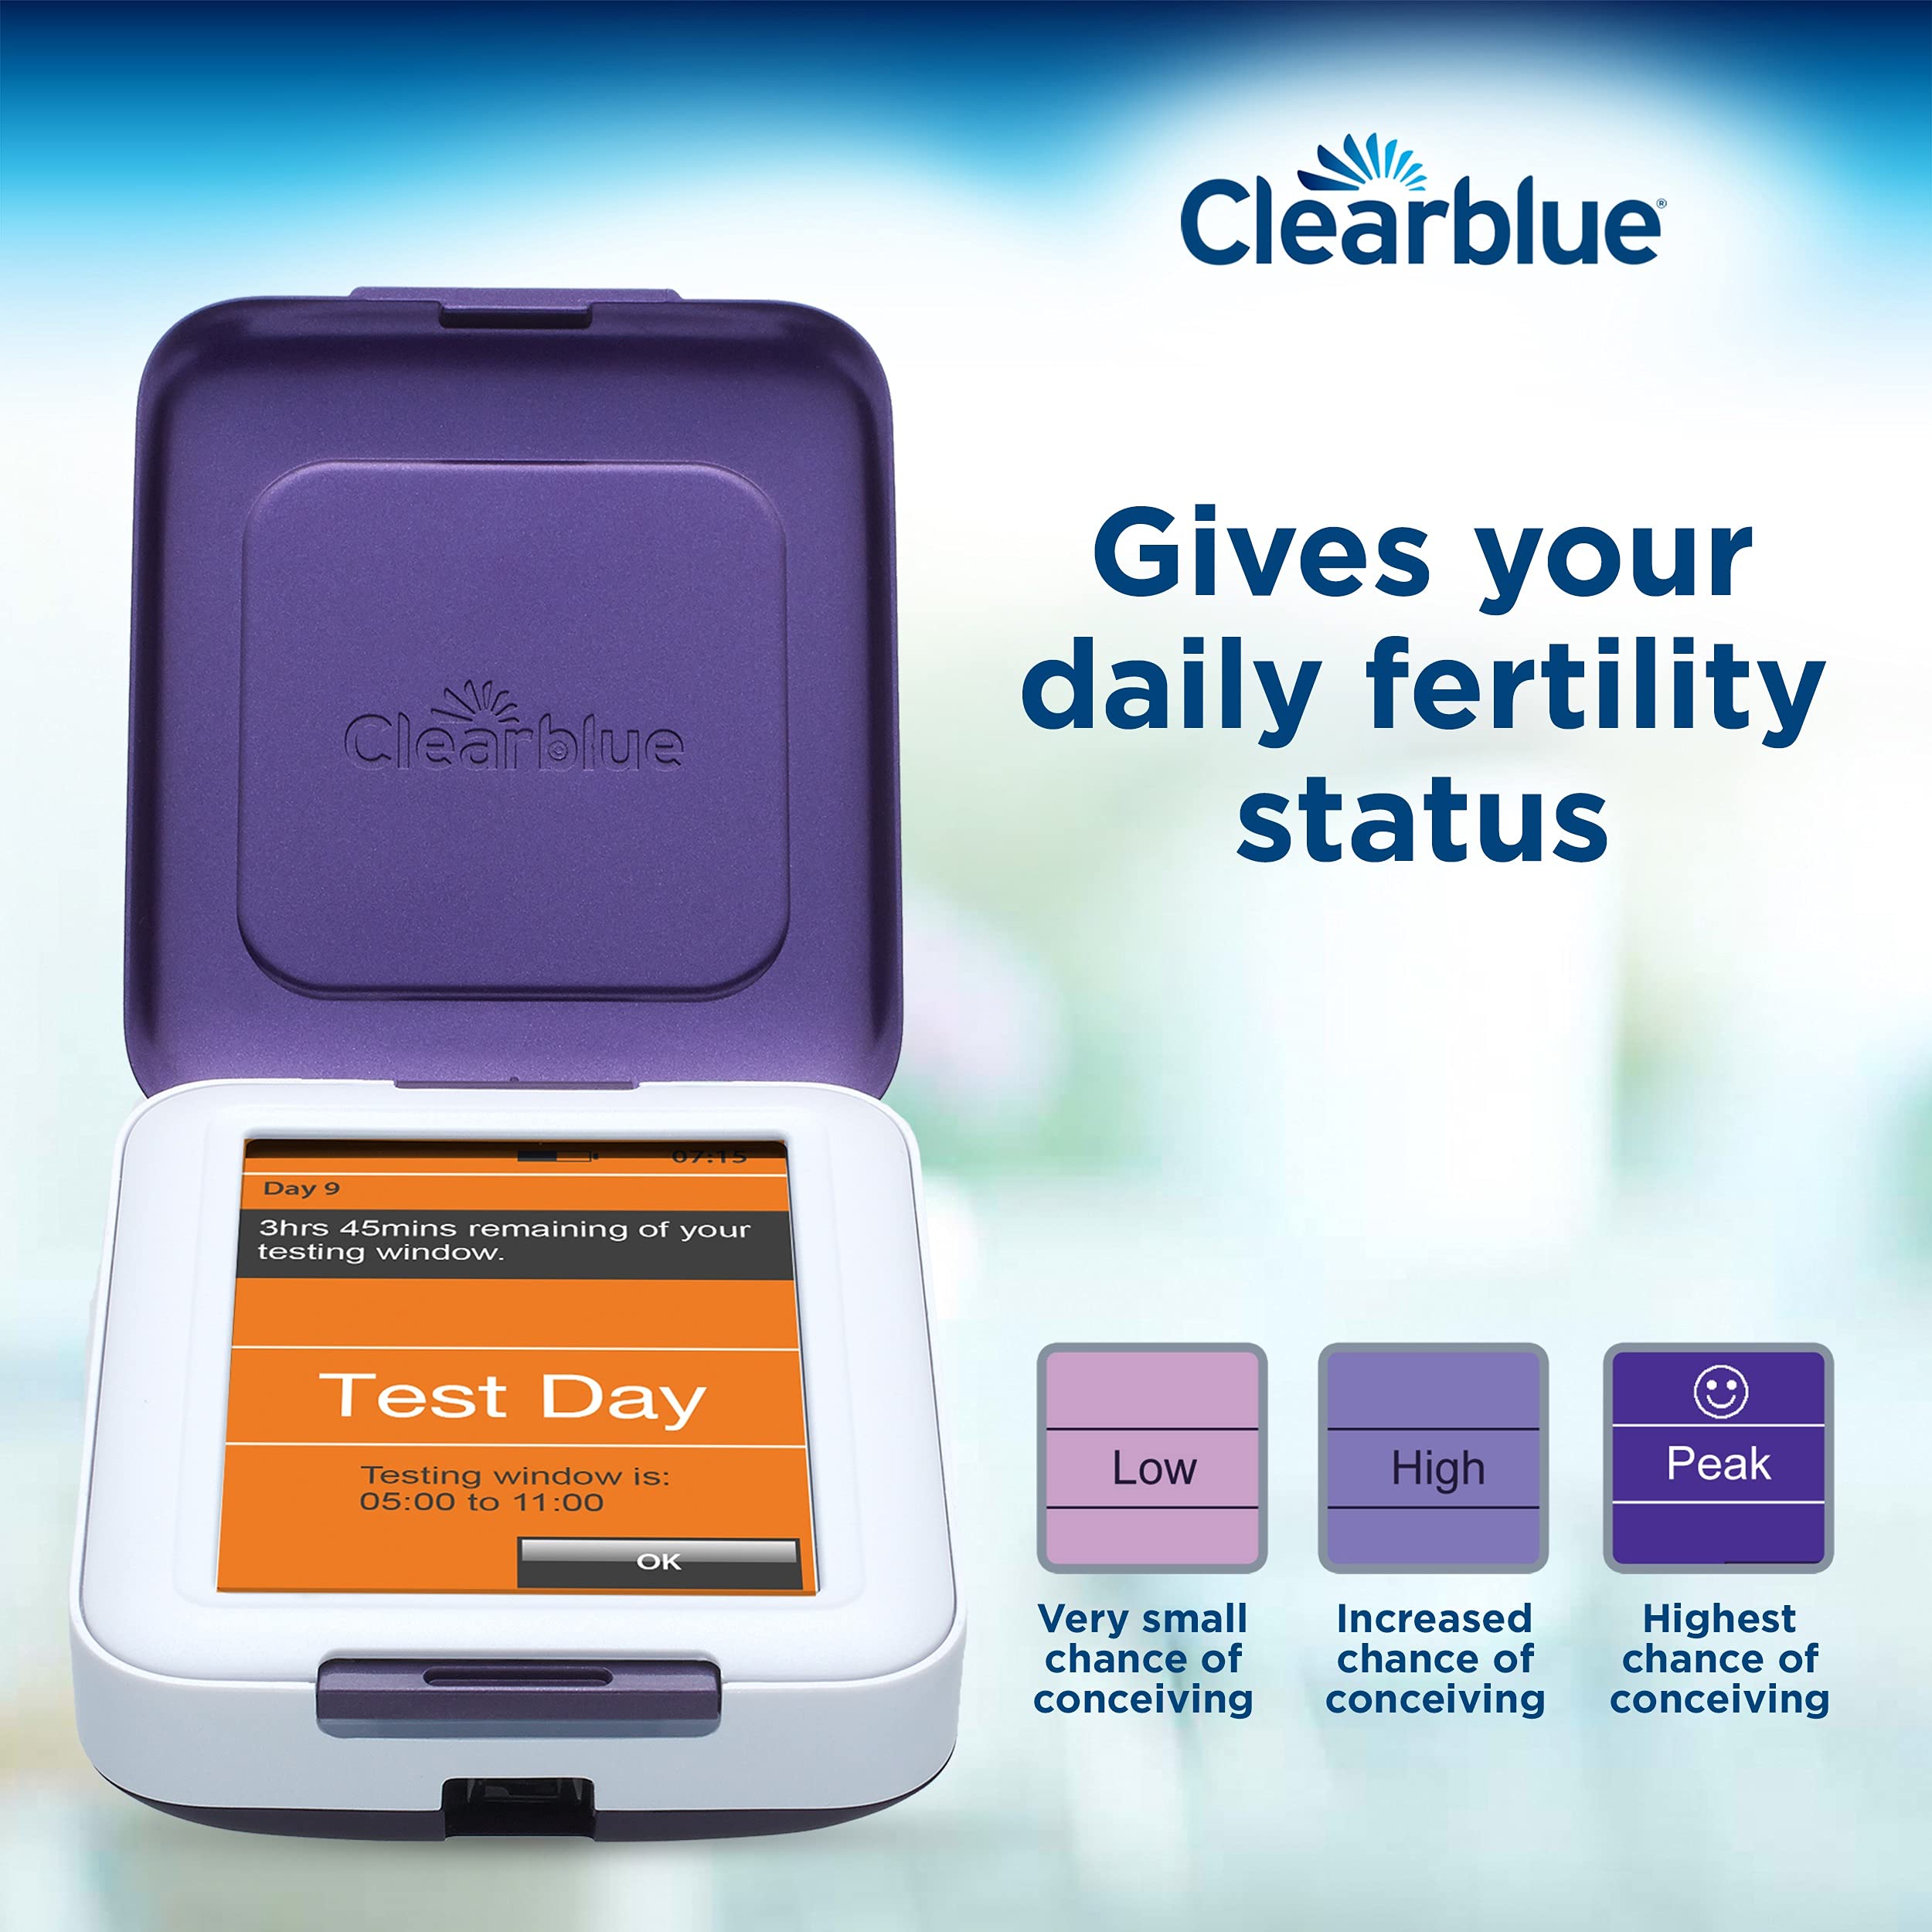 Clearblue Fertility Monitor, Touch Screen, 1 Count